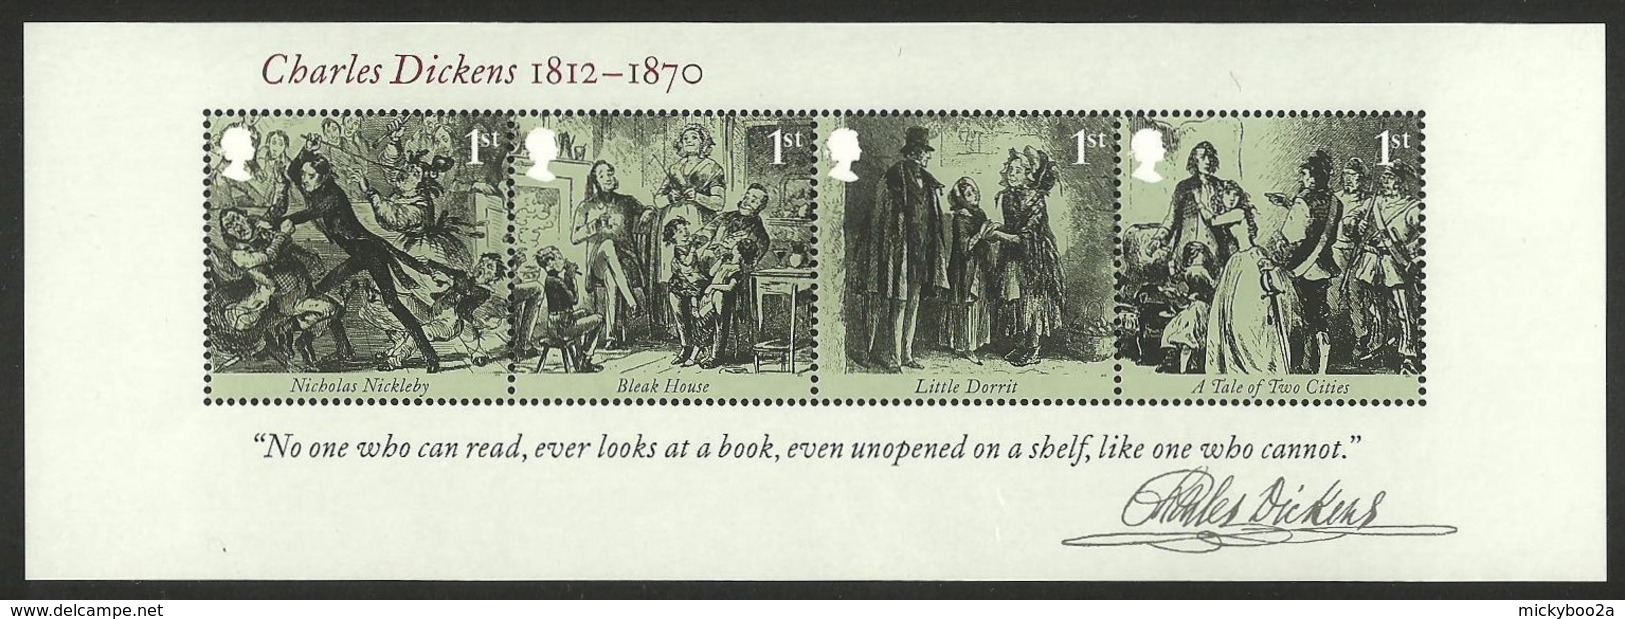 GB 2012 CHARLES DICKENS TALE OF TWO CITIES BLEAK HOUSE M/SHEET MNH - Unused Stamps